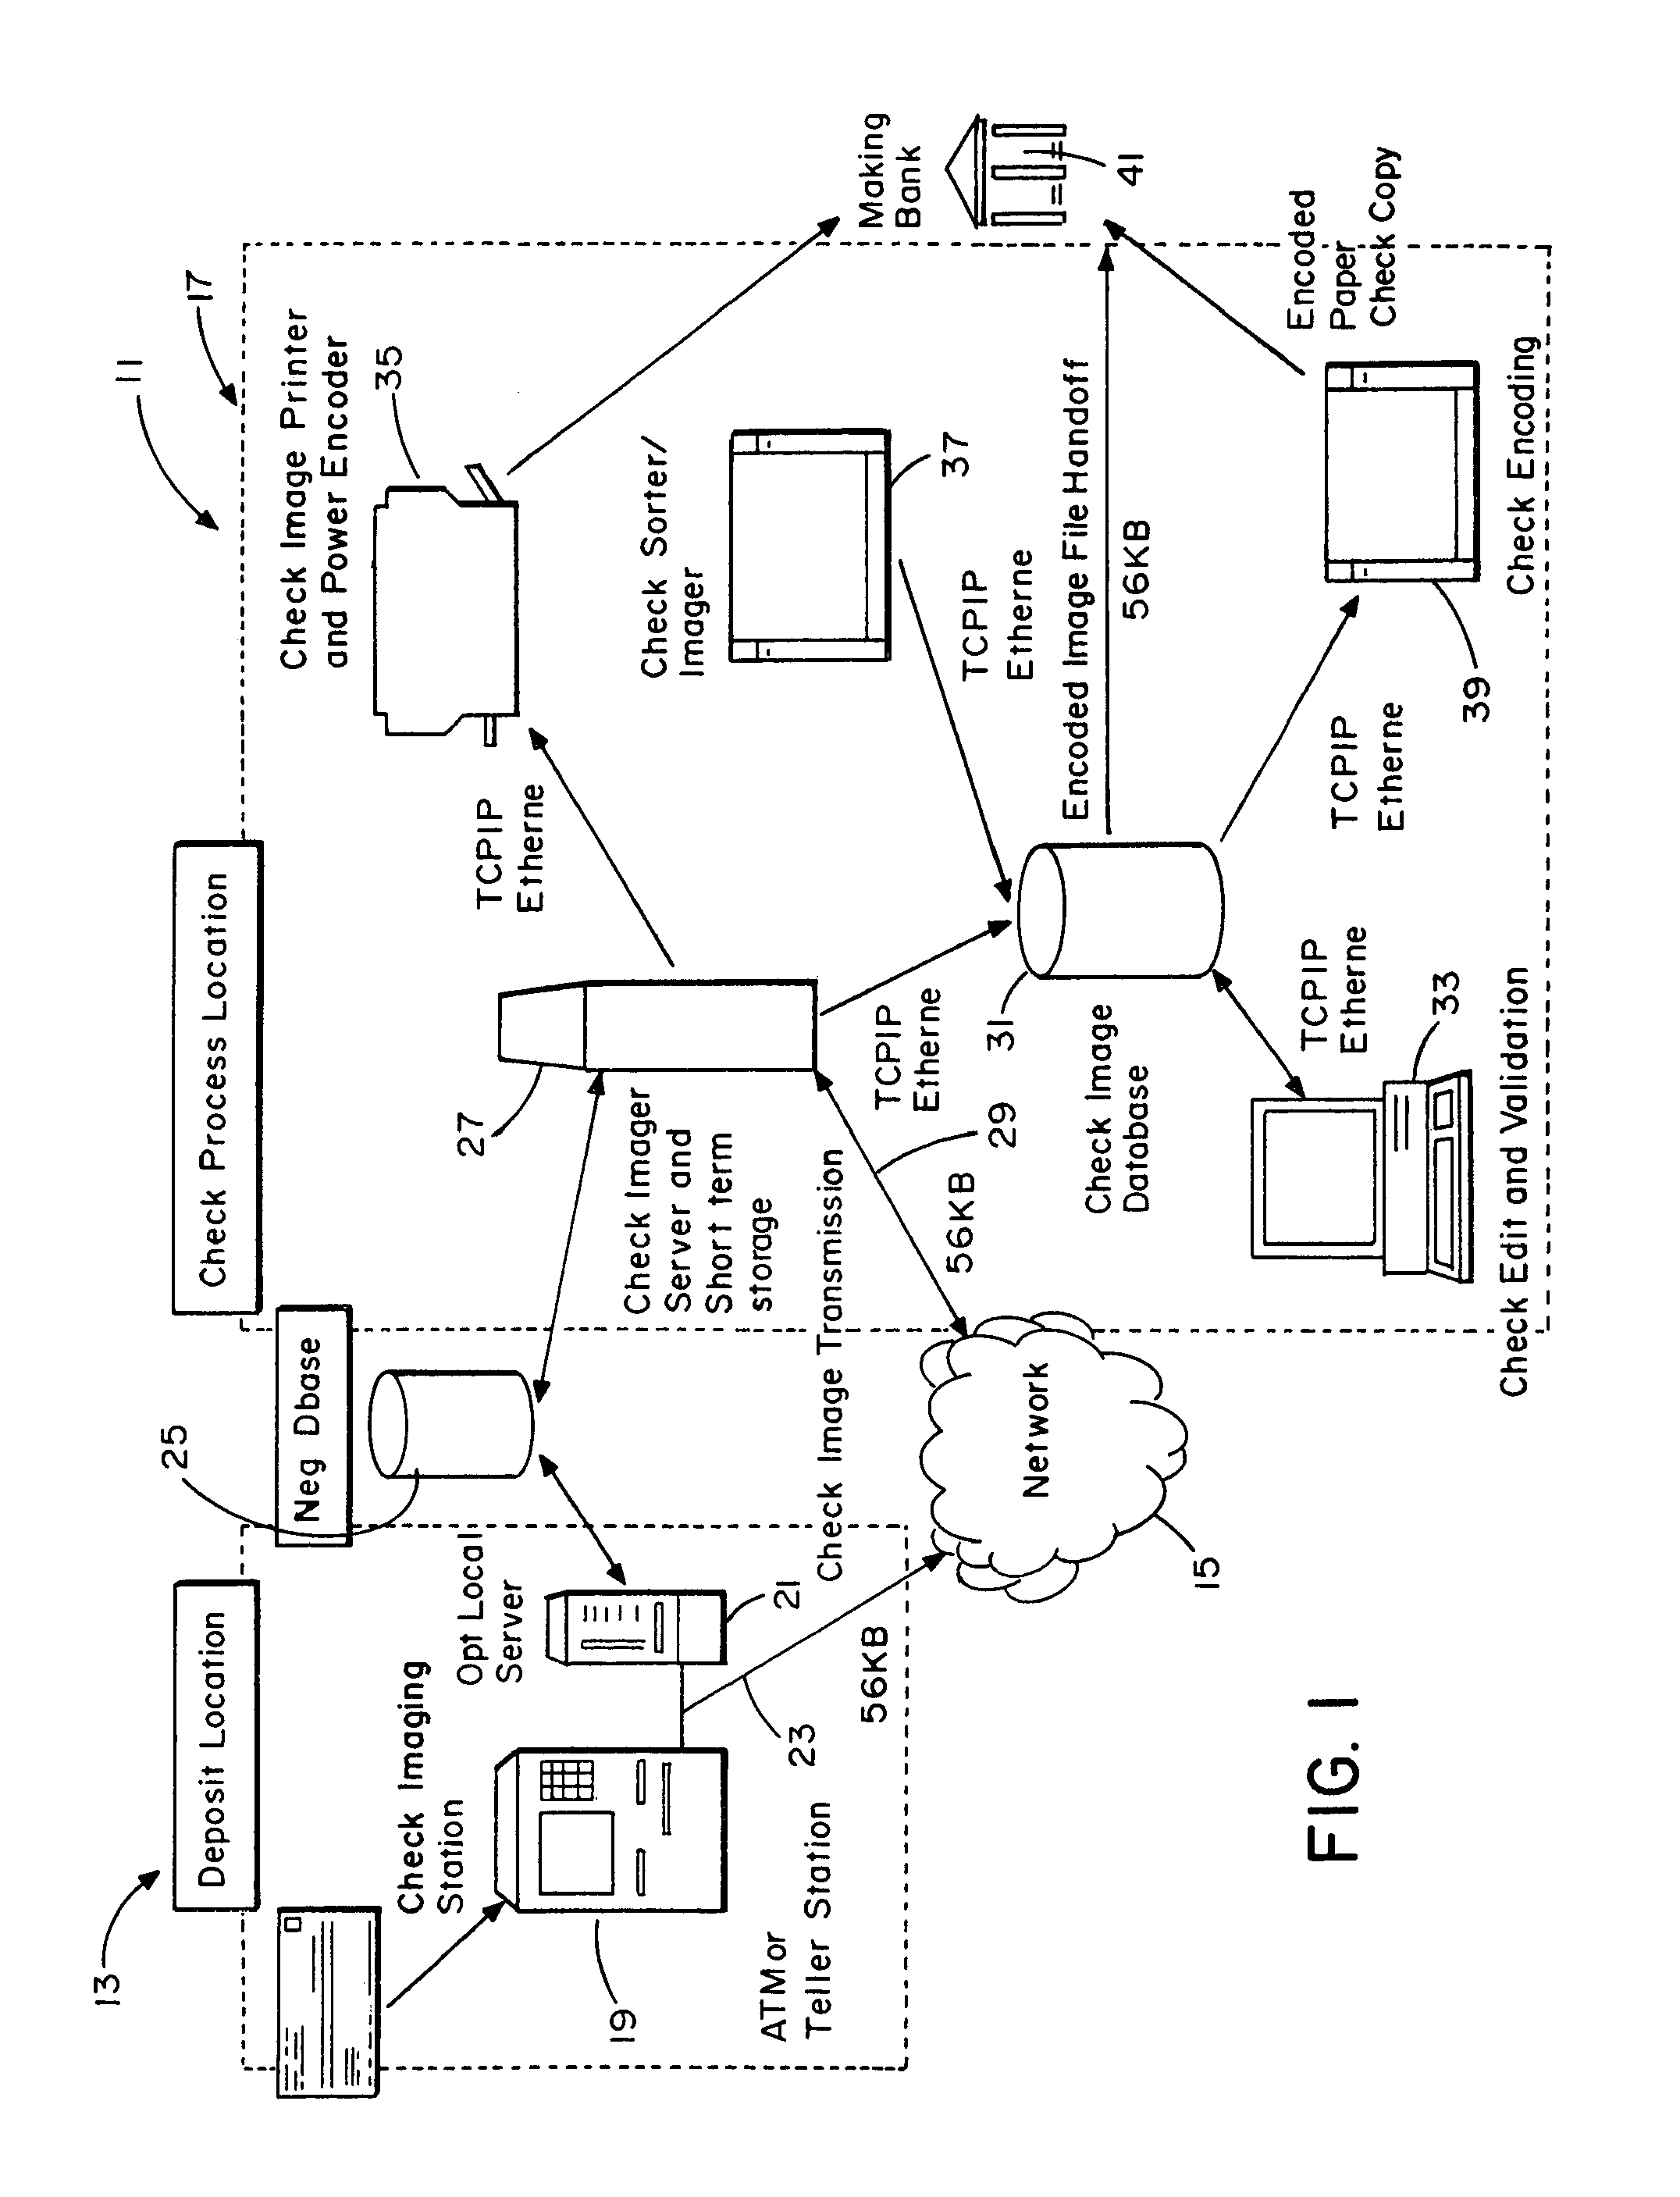 System and Method For Image Depositing, Image Presentment and Deposit Taking in a Commercial Environment